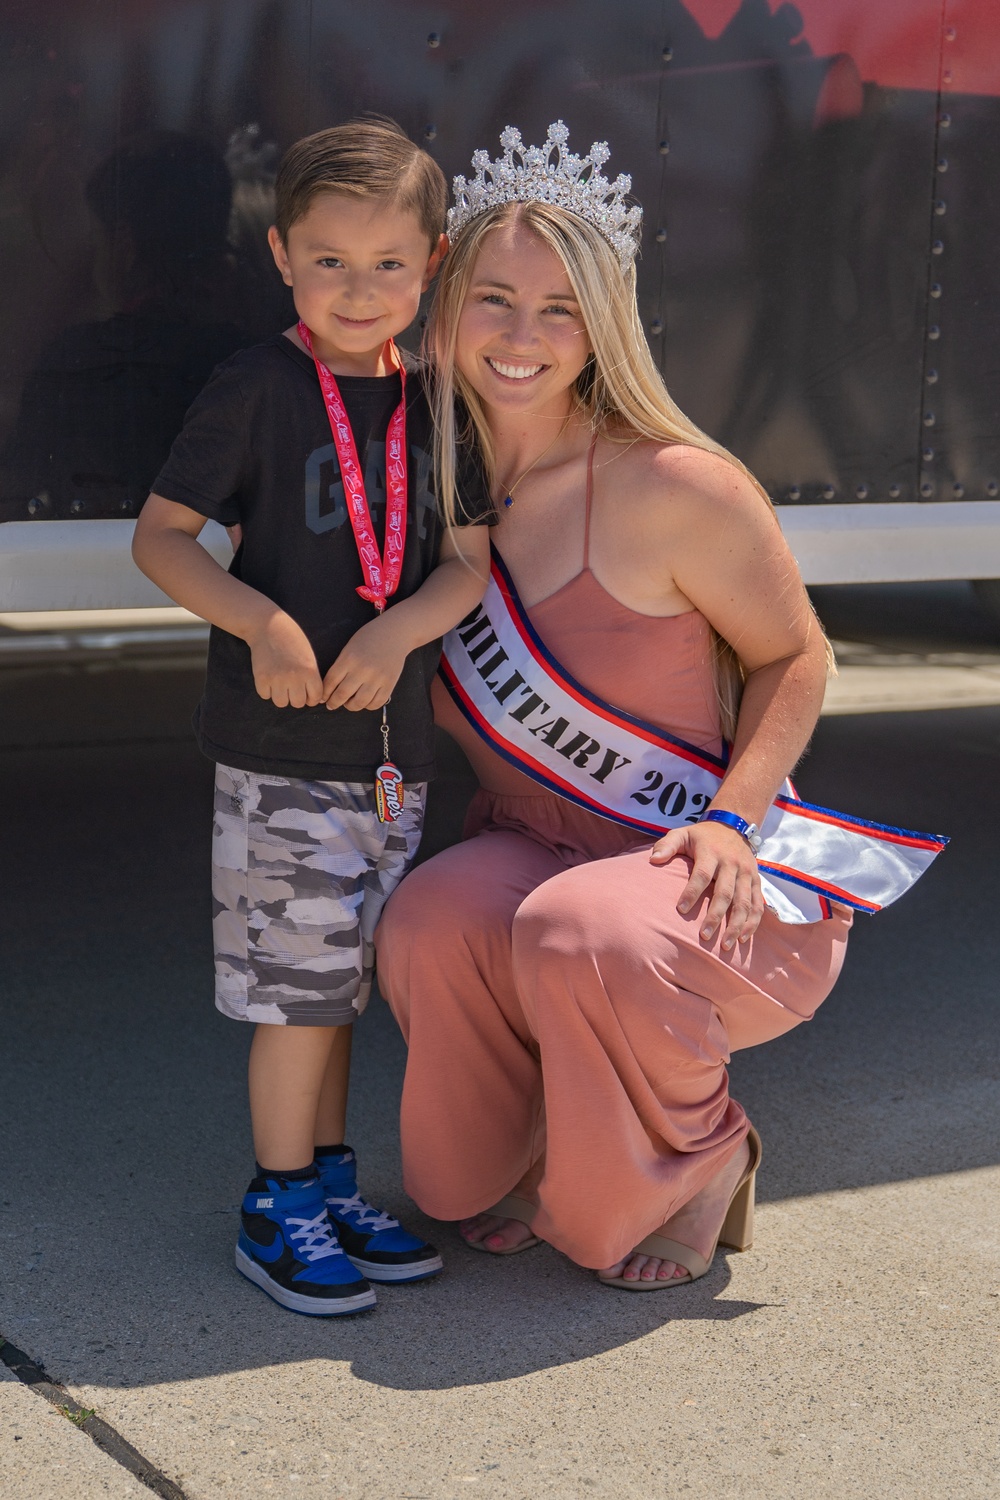 Ms. Military 2023 takes snapshot with a young visitor at the SoCal Air Show